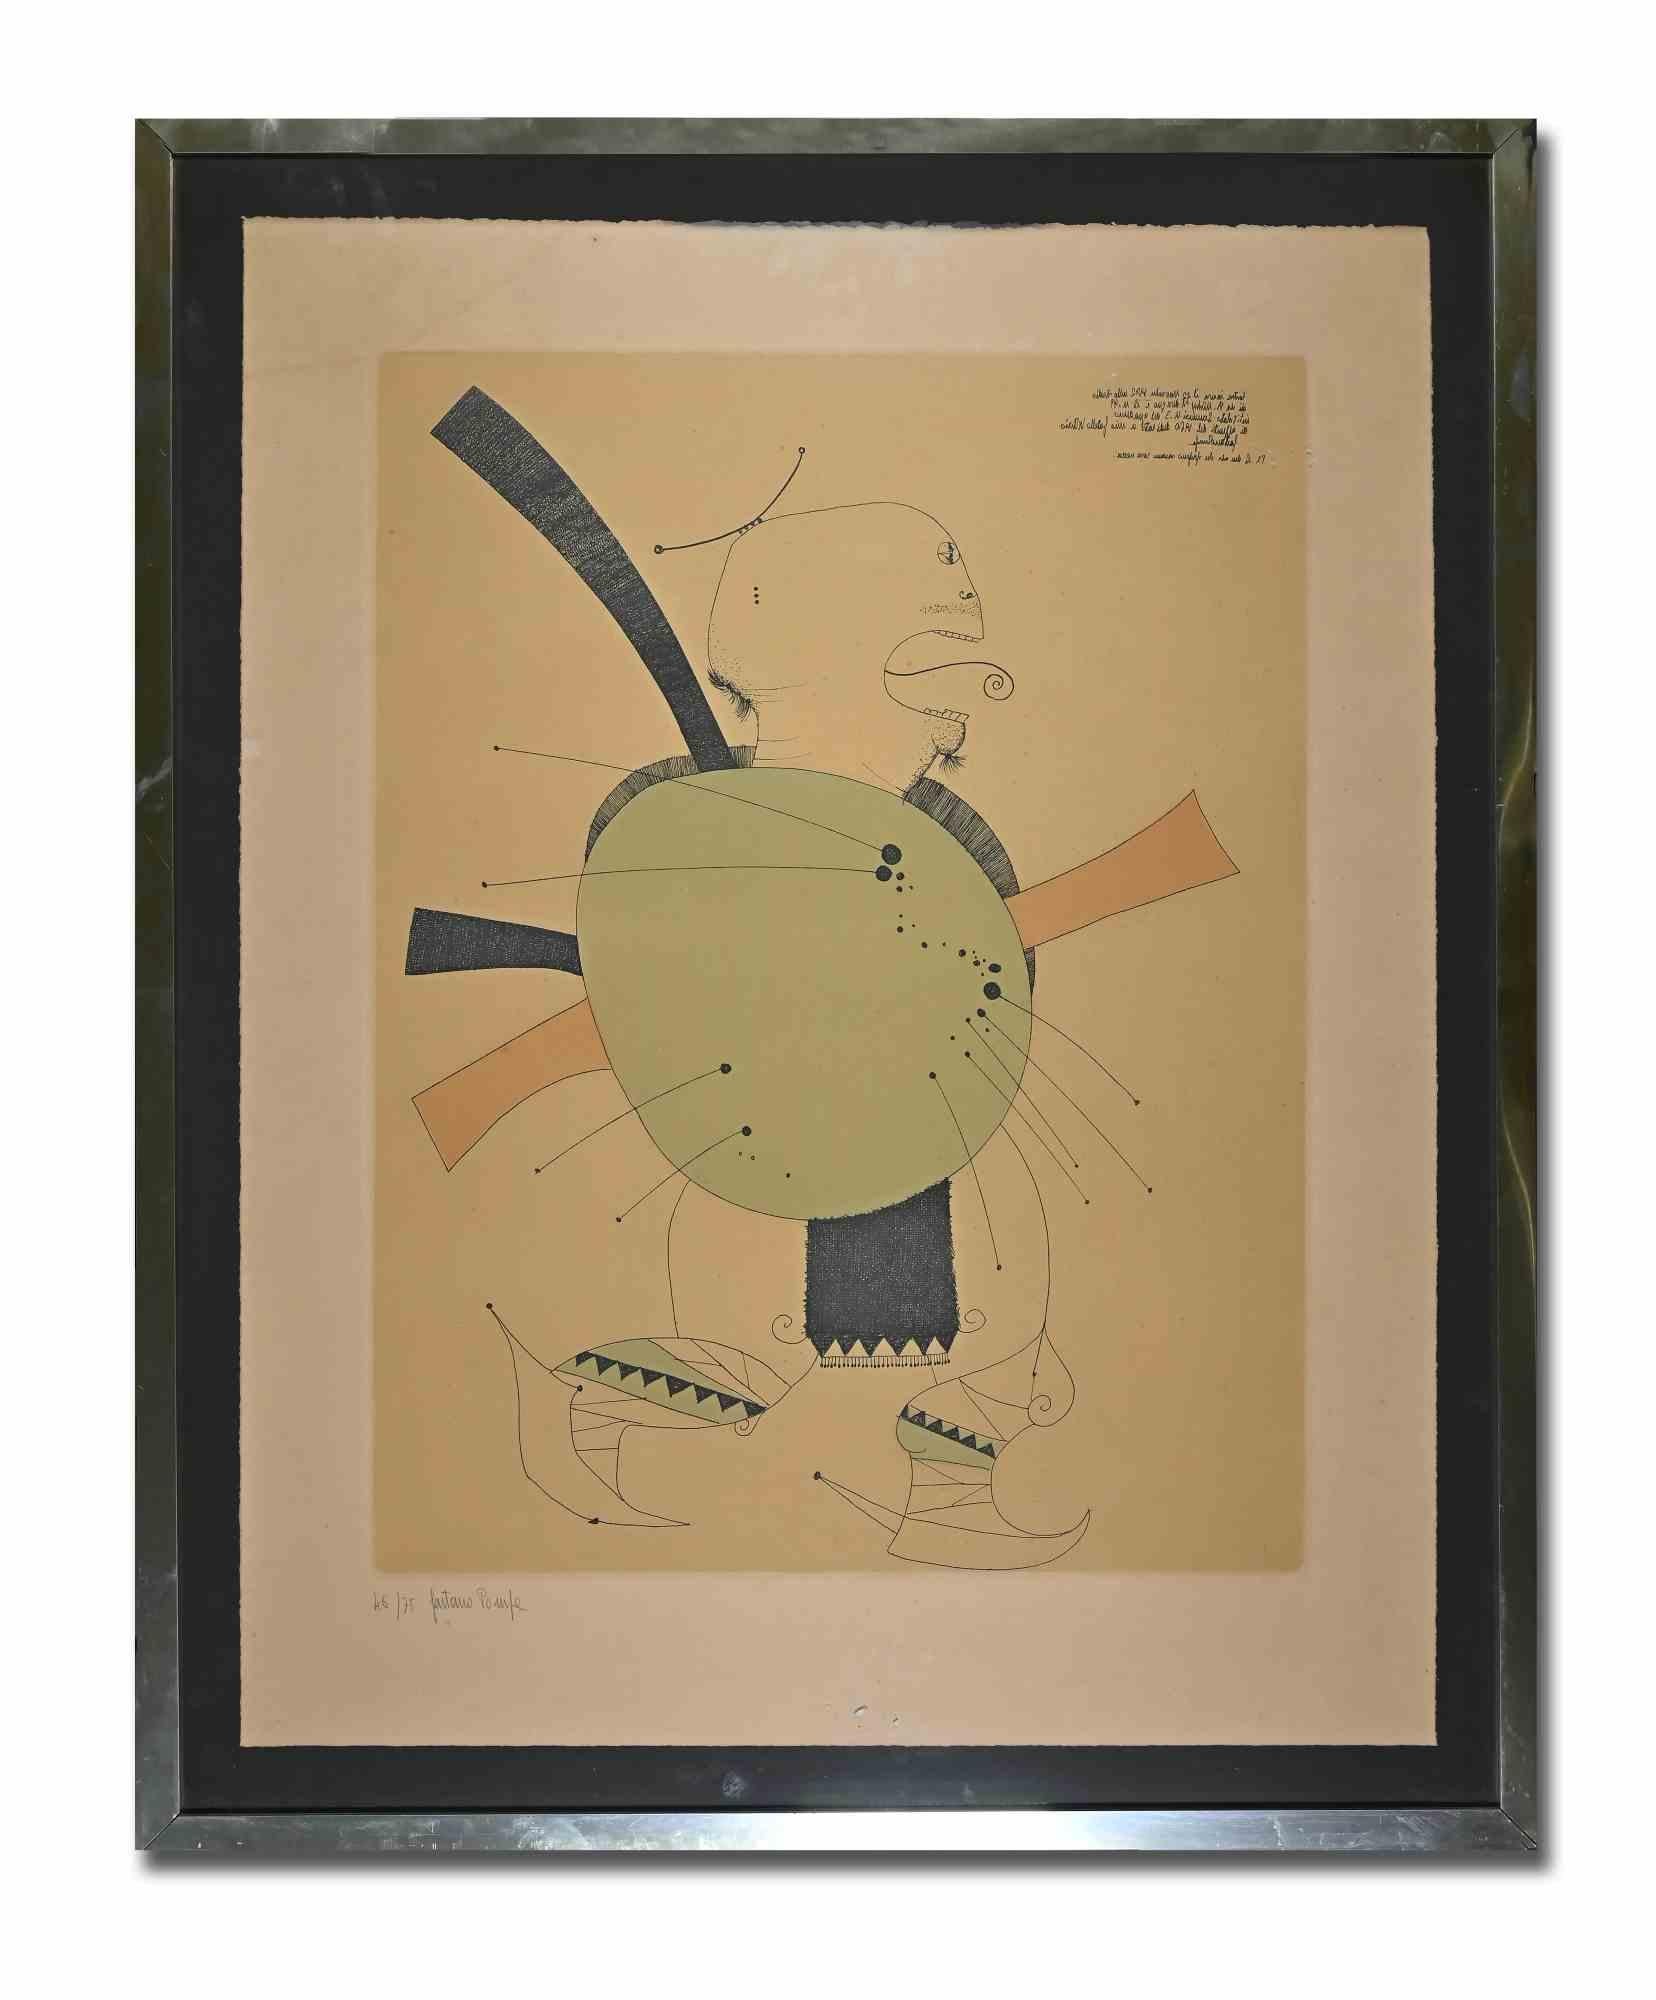 Samurai n. 3 is an original contemporary artowork realized by Gaetano Pompa.

Mixed colored etching and heliography.

Hand signed and numbered on the lower left. Edition of 46/75.

Includes frame: 91 x 73 cm

Provenance: Galleria Rondanini (label on